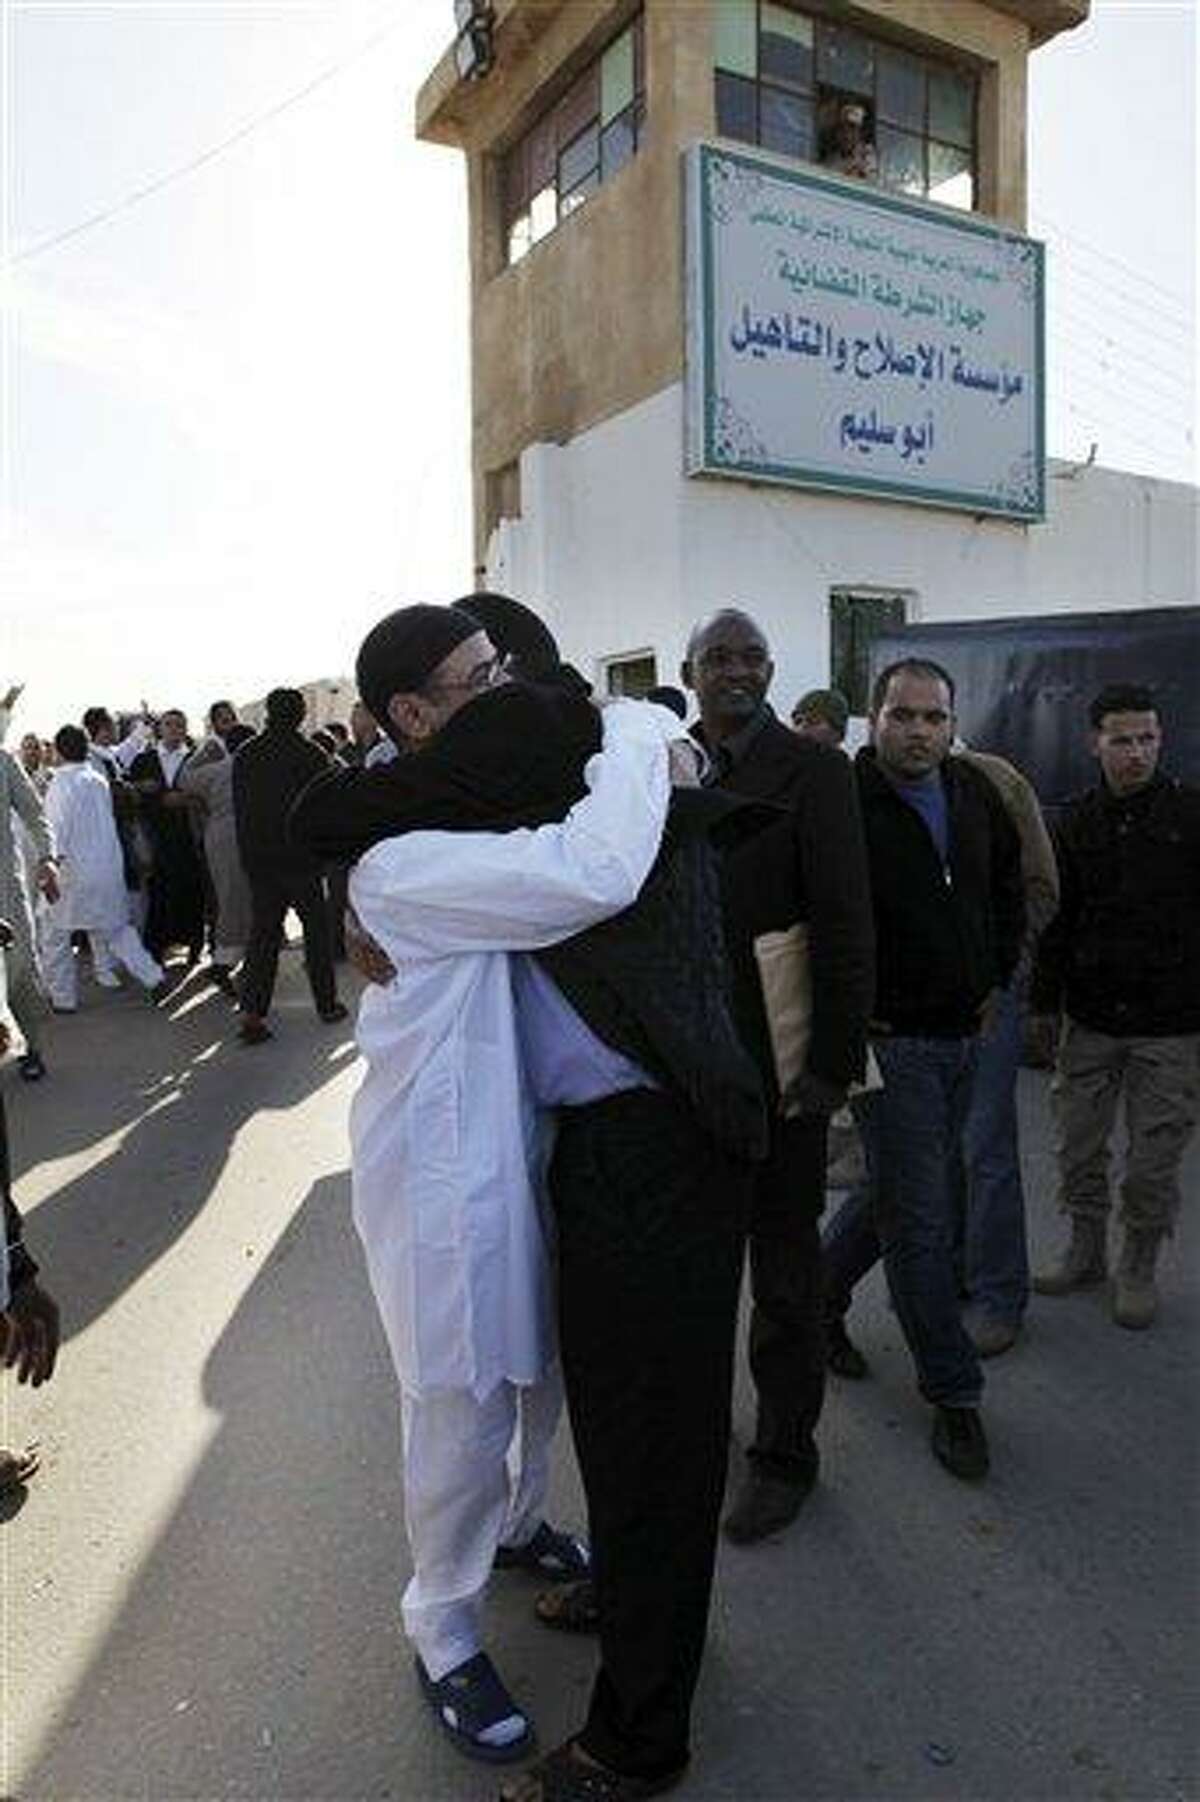 A Libyan prisoner, left, is hugged by his relatives after he was released with a group of 110 prisoners from Abu Salim, Libya's most notorious prison, in Tripoli, Libya, Wednesday, Feb. 16, 2011. Egypt-inspired unrest spread against Libya's longtime ruler Moammar Gadhafi on Wednesday, with riot police clashing with protesters in the second-largest city of Benghazi and marchers setting fire to security headquarters and a police station in the city of Zentan, witnesses said. Gadhafi's government sought to allay further unrest by proposing the doubling of government employees' salaries and releasing 110 suspected Islamic militants who oppose him tactics similar to those used by other Arab regimes in the recent wave of protests. (AP Photo/ Abdel Magid Al Fergany)